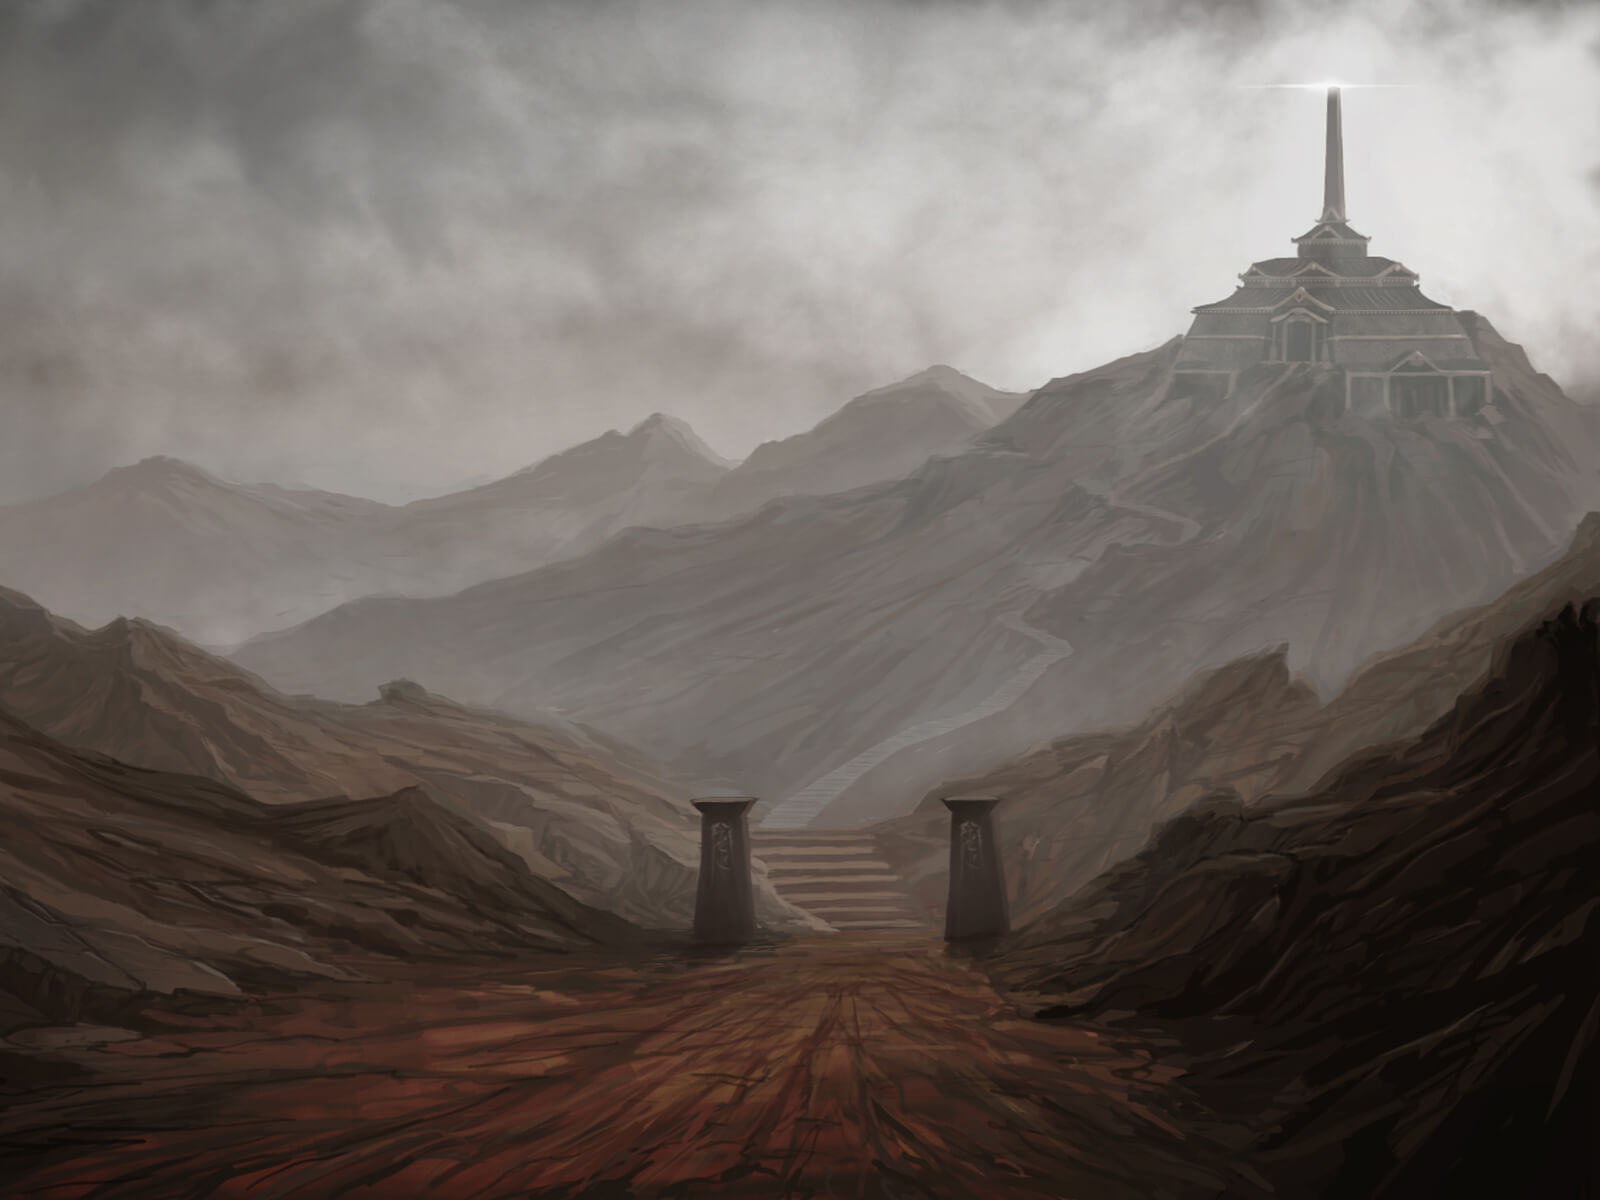 A temple and a single shining spire lie high up a mountainside, overlooking a desolate rocky landscape below.